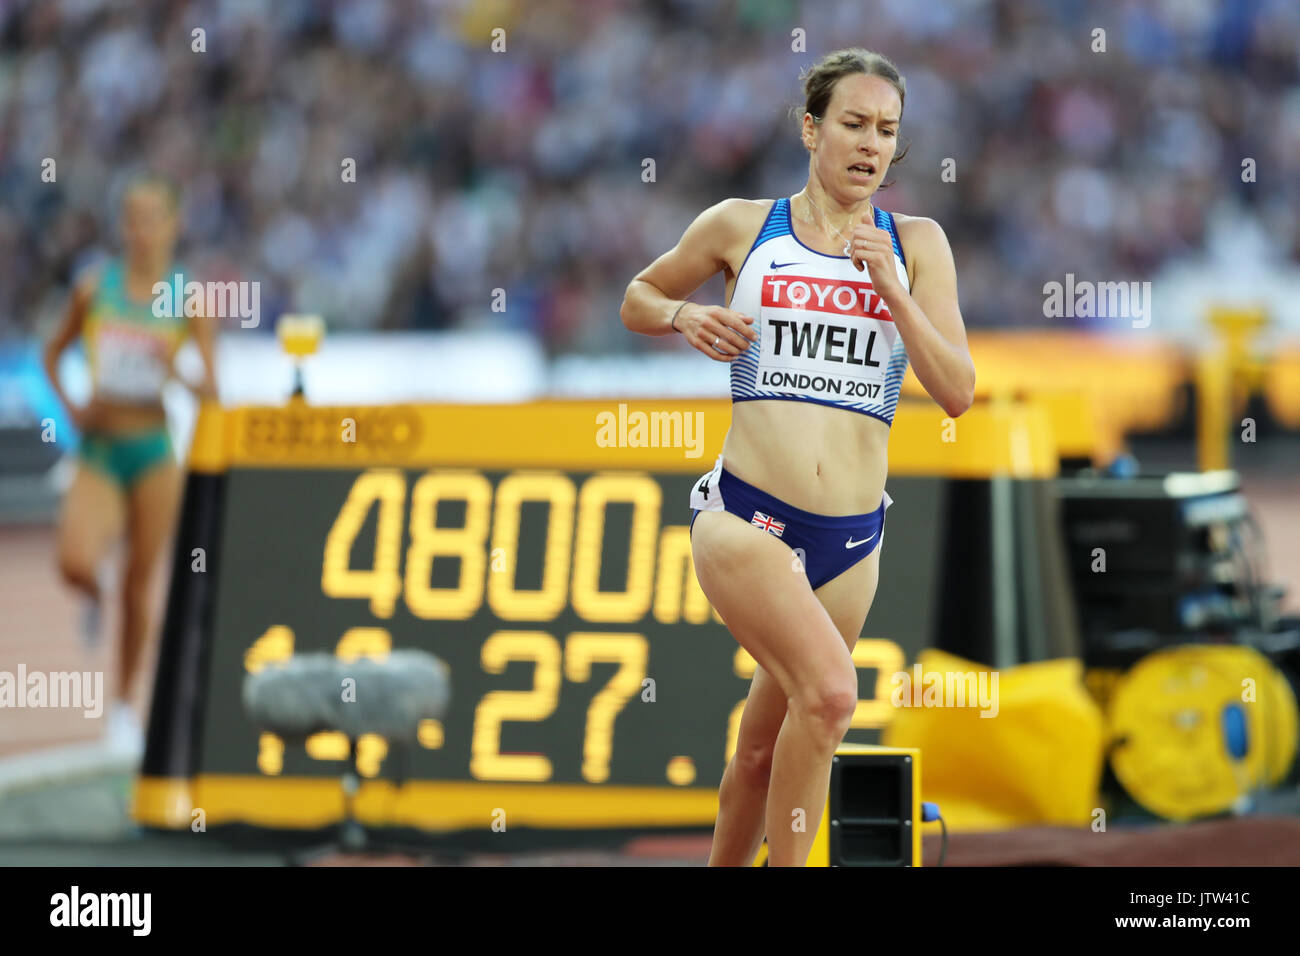 London, UK. 10-Aug-17. Stephanie TWELL (Great Britain) competing in the Women's 5000m Heat 2 at the 2017 IAAF World Championships, Queen Elizabeth Olympic Park, Stratford, London, UK. Credit: Simon Balson/Alamy Live News Stock Photo